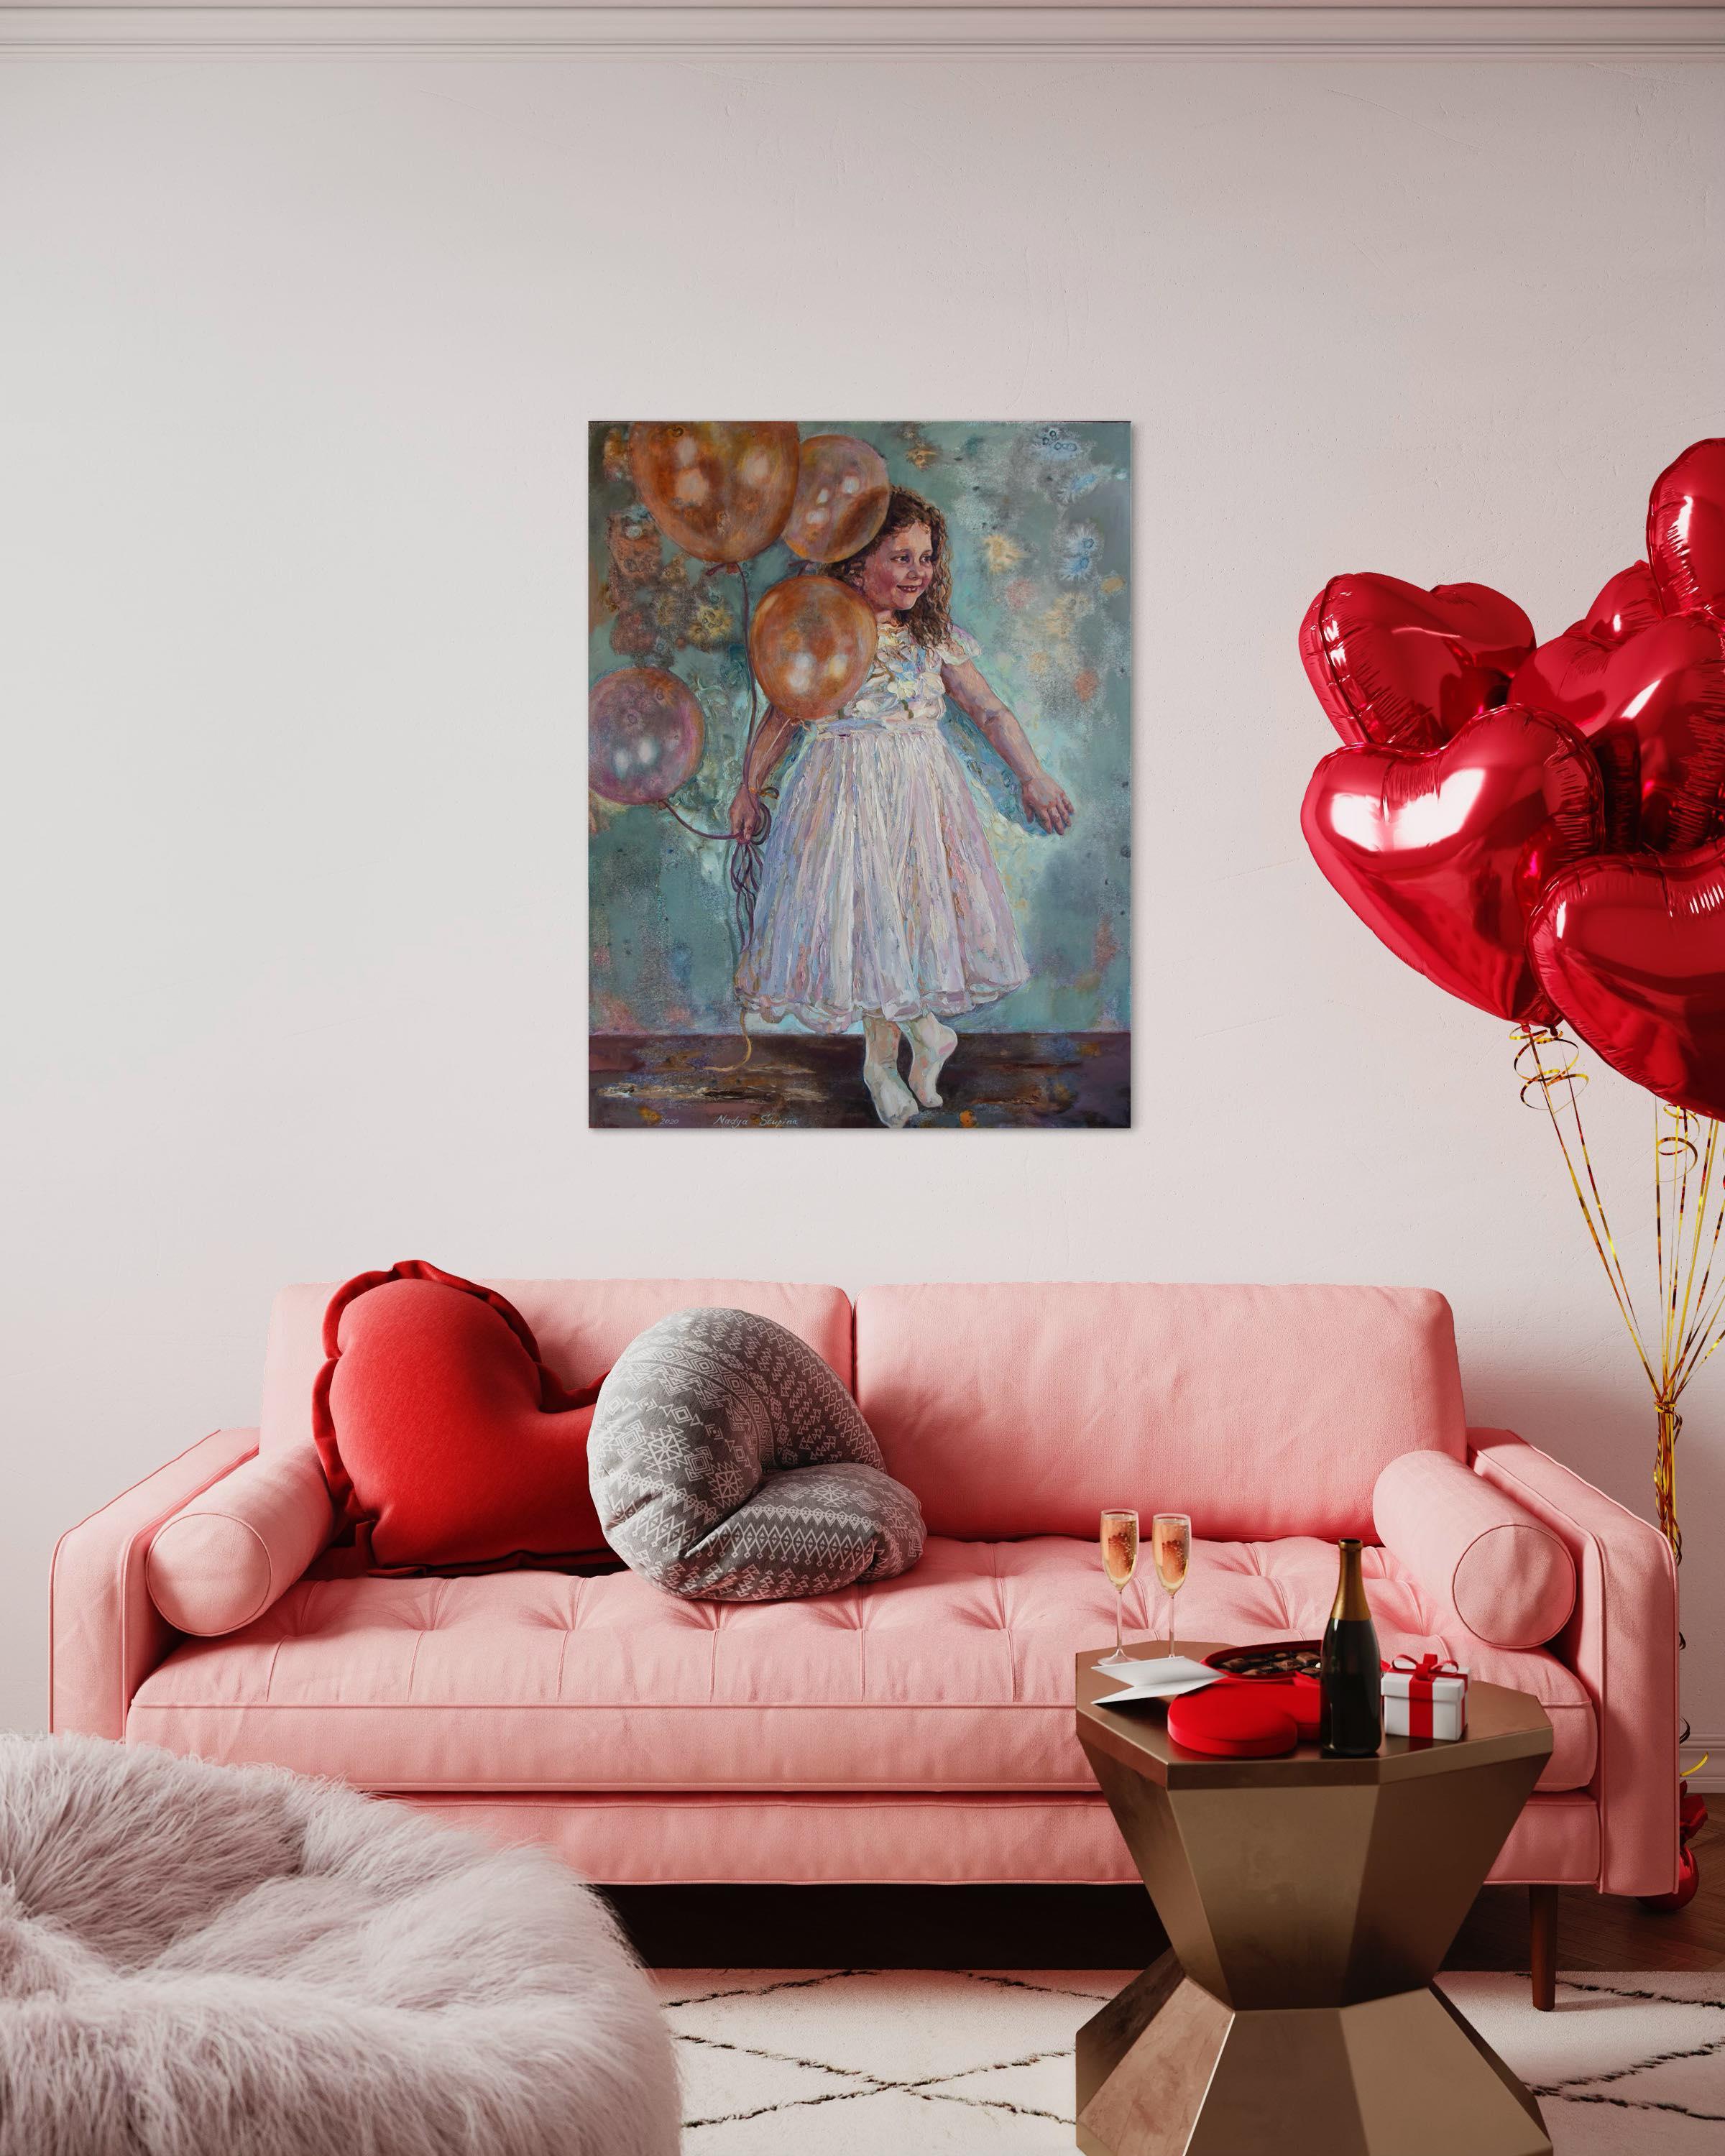 In creating this piece, I infused the canvas with the innocence and wonder of childhood. Through a dance of oil paint, I captured the playful lightness of a young spirit aloft with balloons. The textured strokes and warm palette evoke a timeless